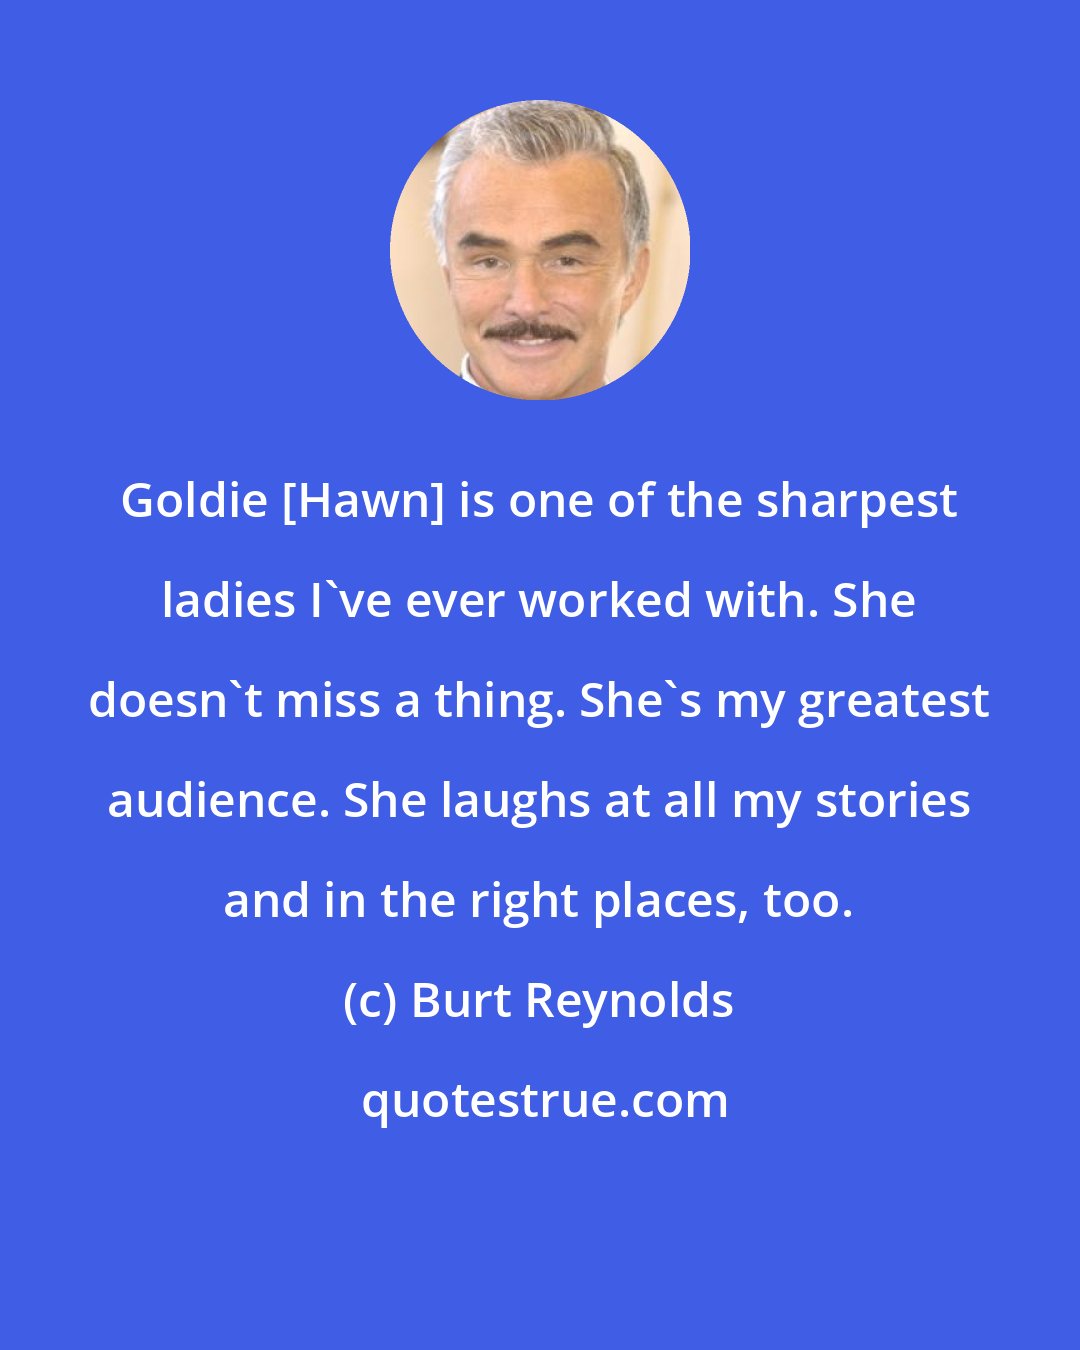 Burt Reynolds: Goldie [Hawn] is one of the sharpest ladies I've ever worked with. She doesn't miss a thing. She's my greatest audience. She laughs at all my stories and in the right places, too.